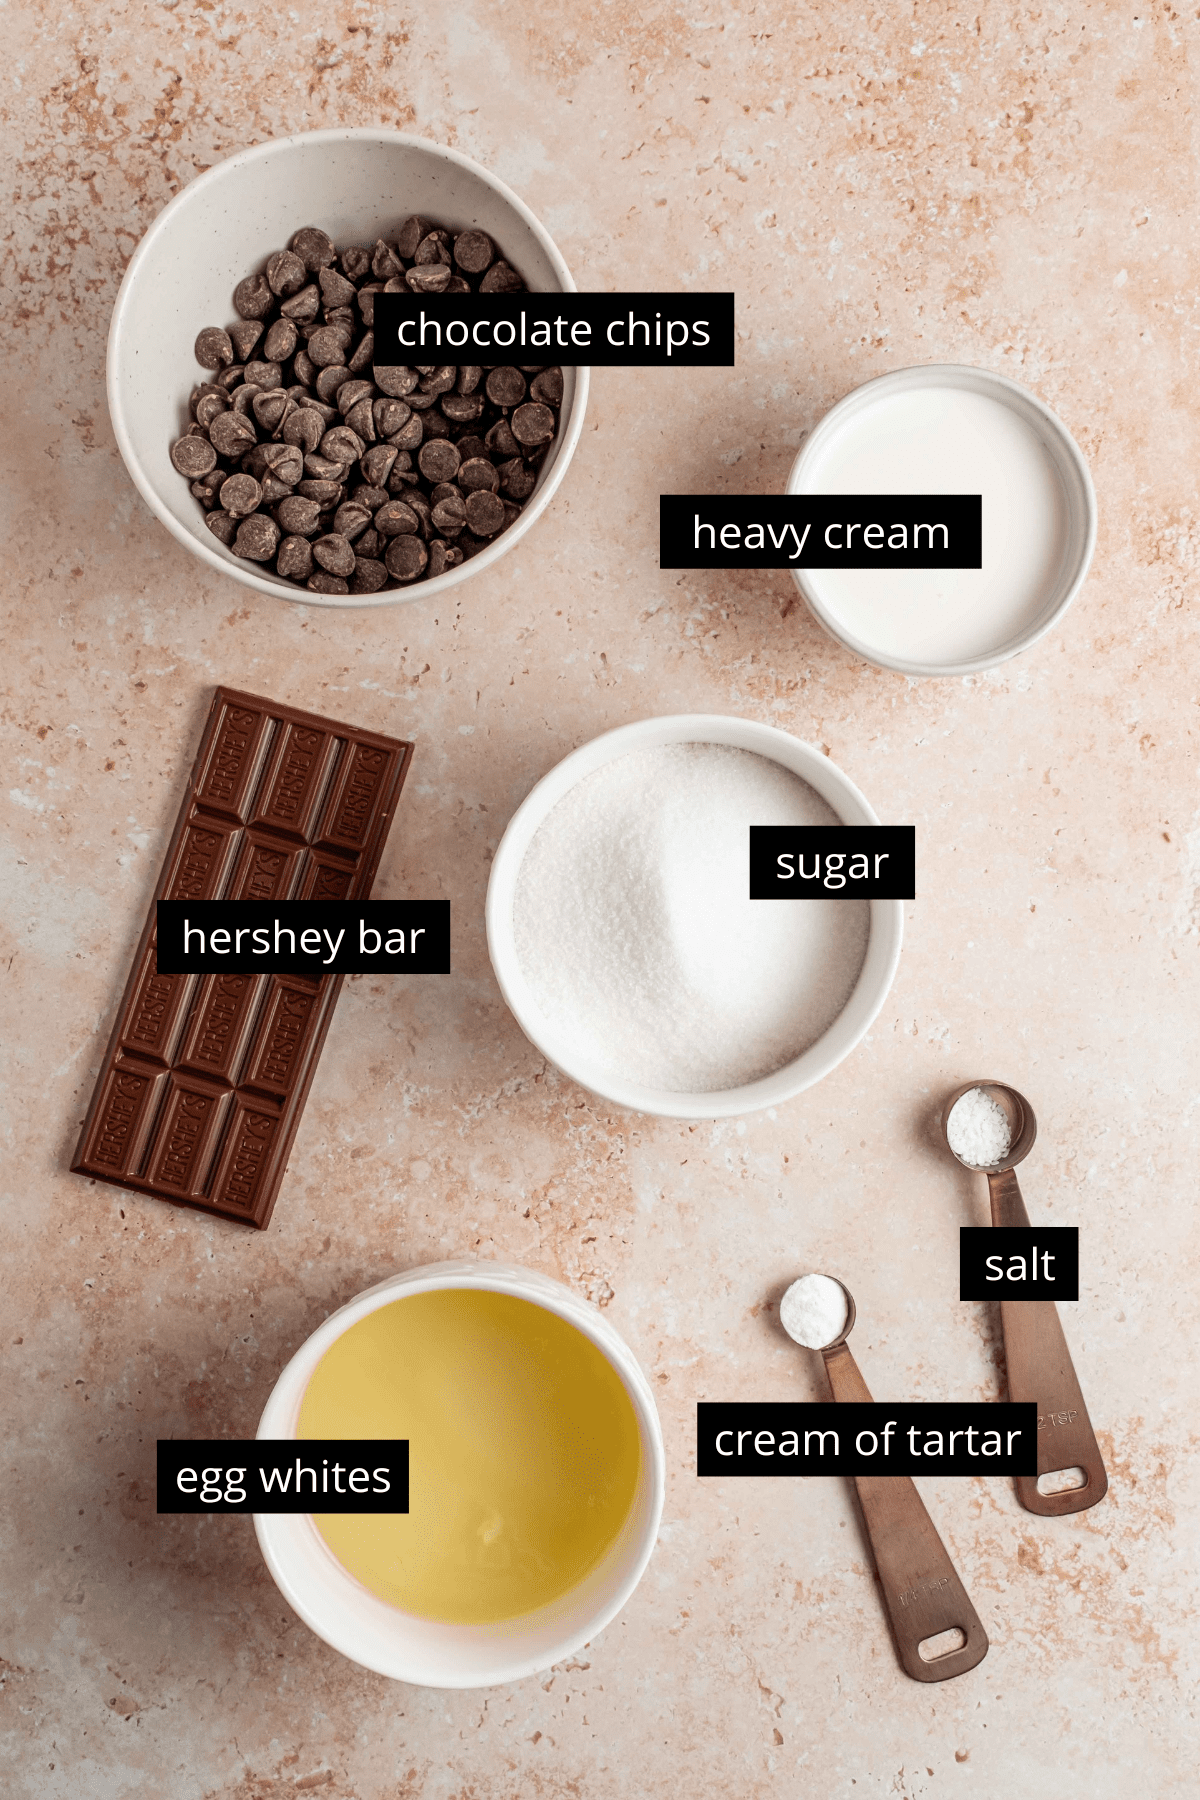 ingredients for meringue topping and chocolate ganache